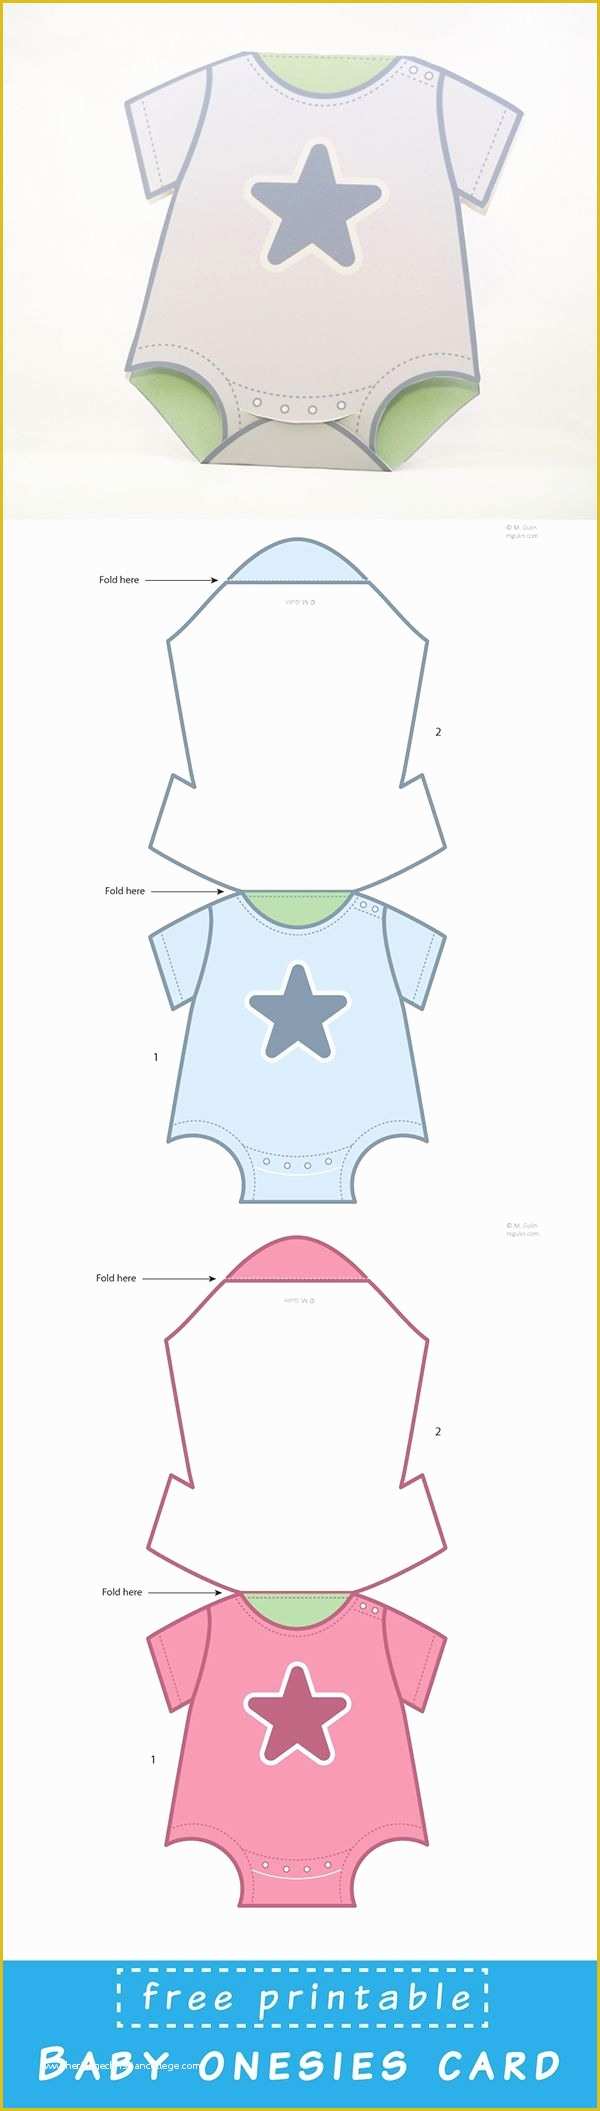 Free Printable Baby Cards Templates Of Free Printable Baby Esies Card Template Just Dowload